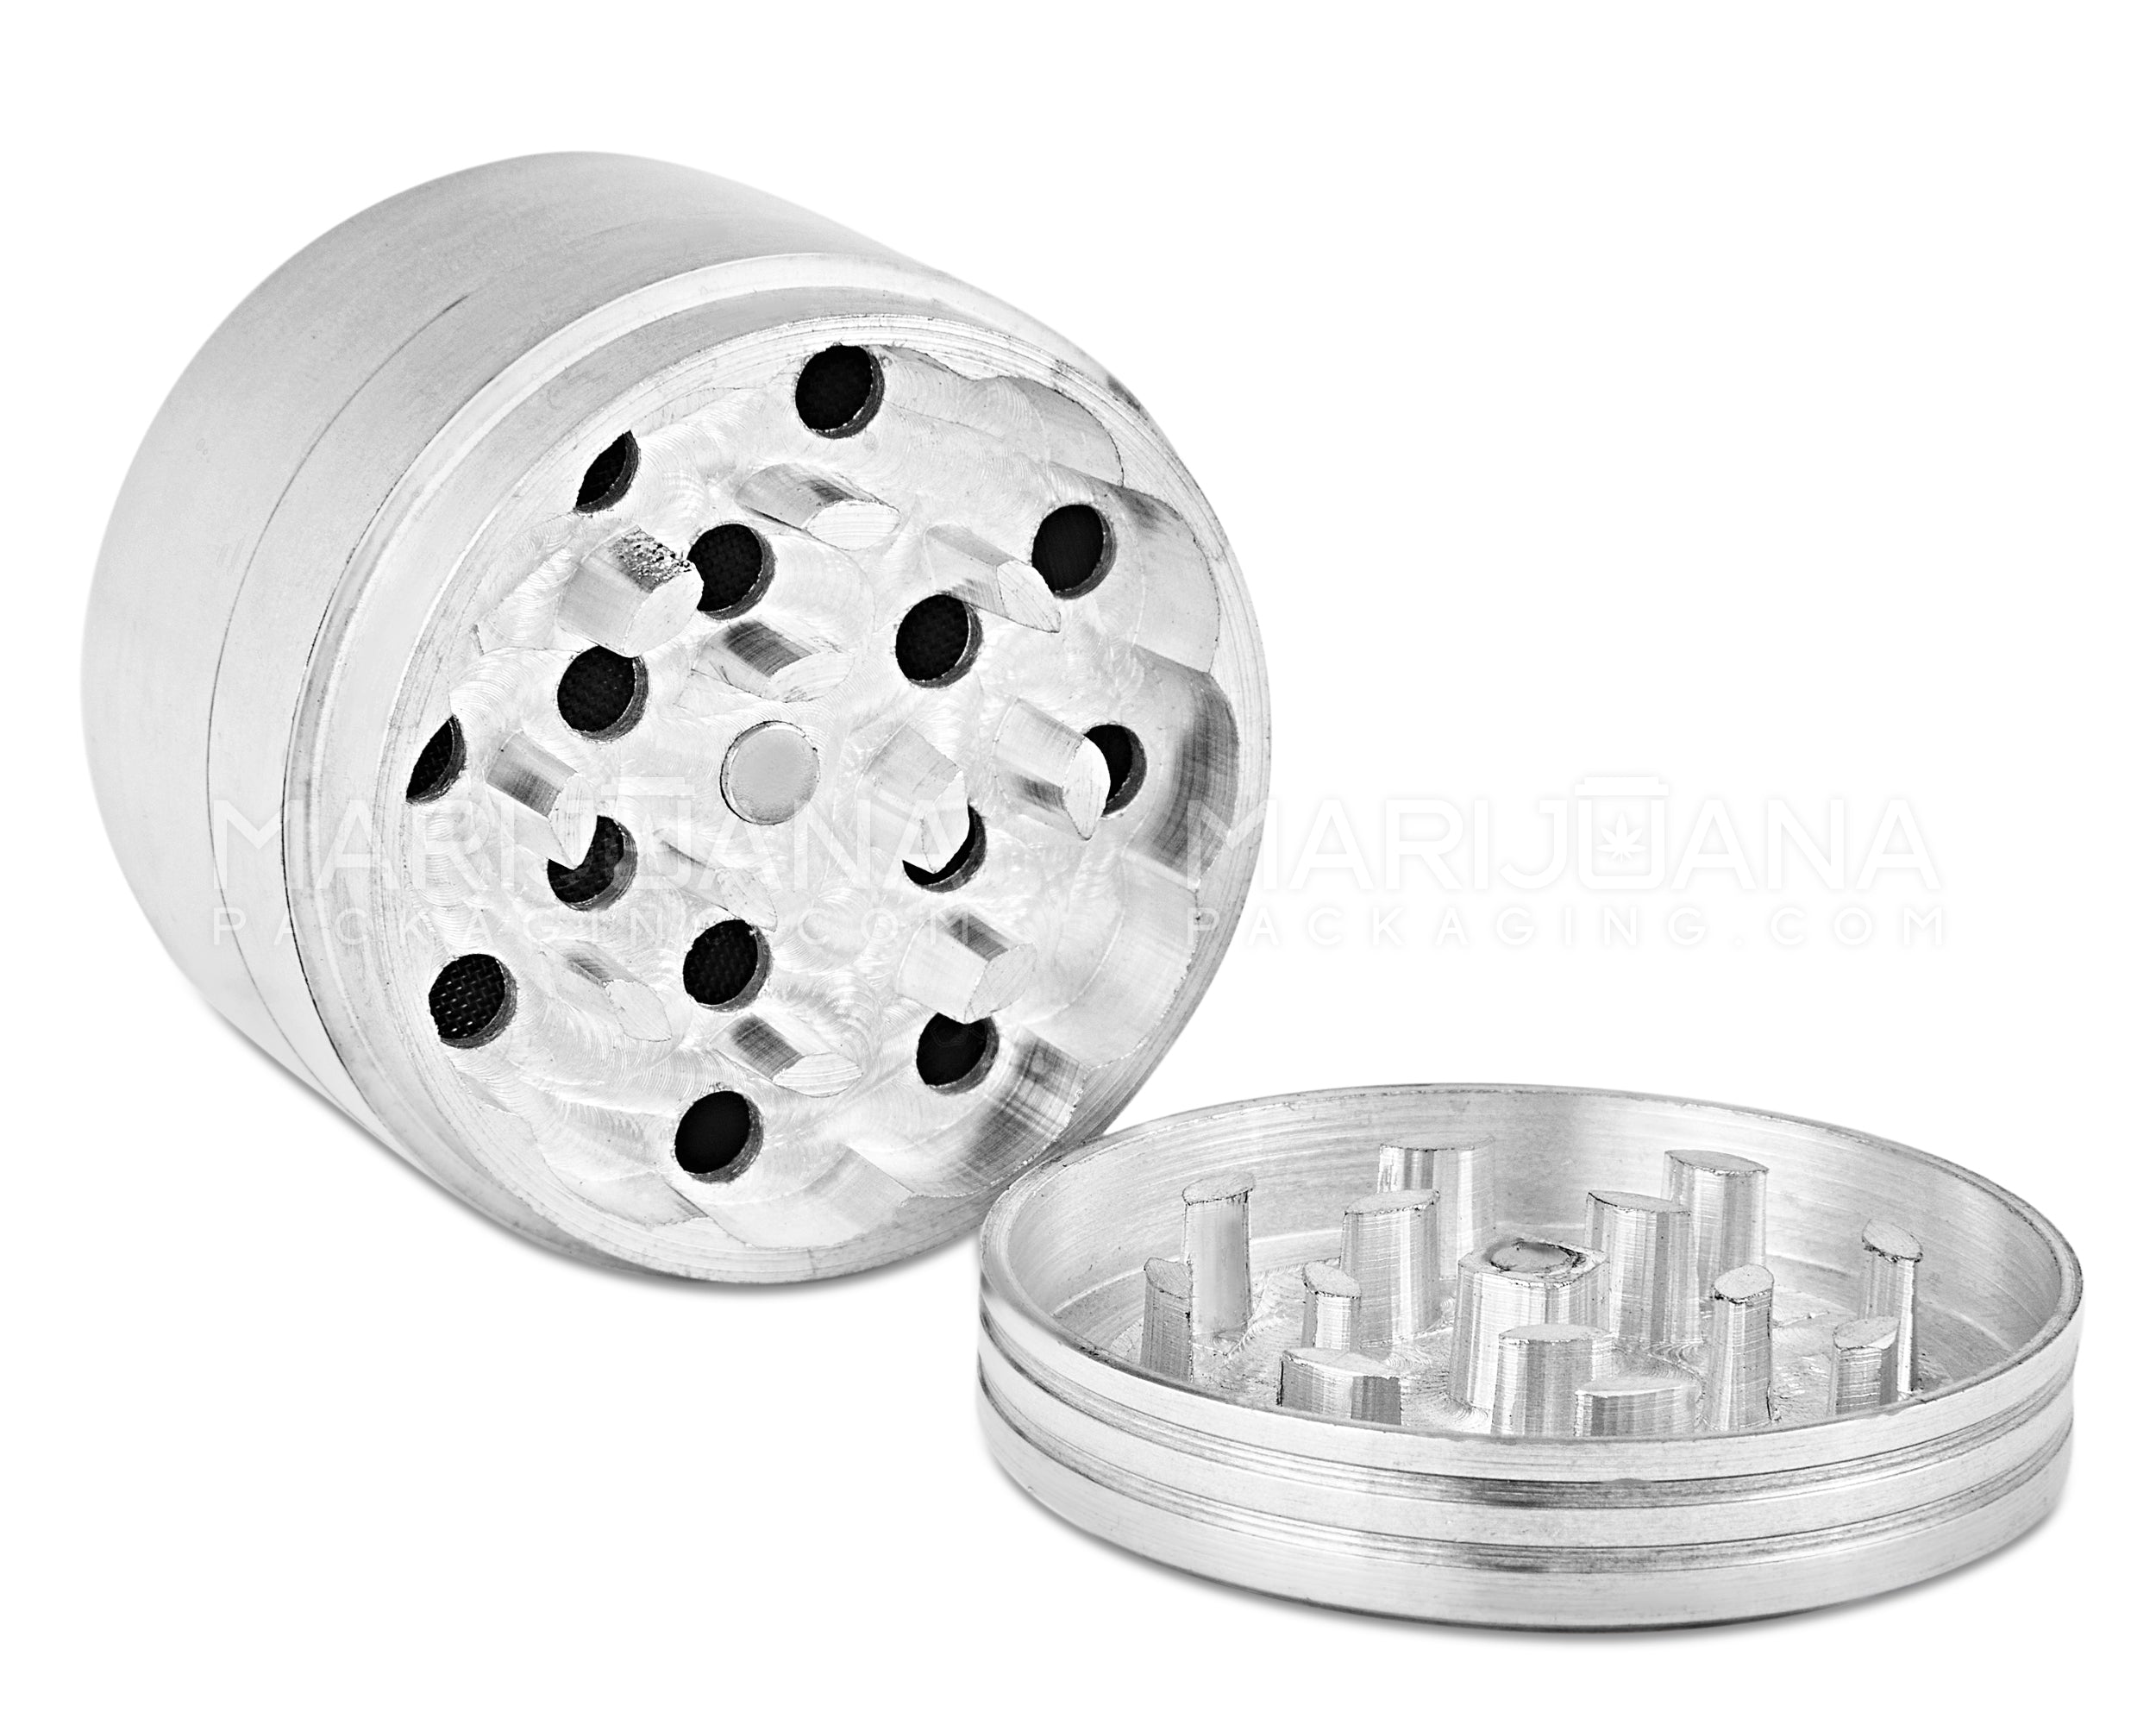 Tobacco Herb Spice Grinder Crusher Smoke 2.0 inch 4-Piece Metal Magnetic  Lid